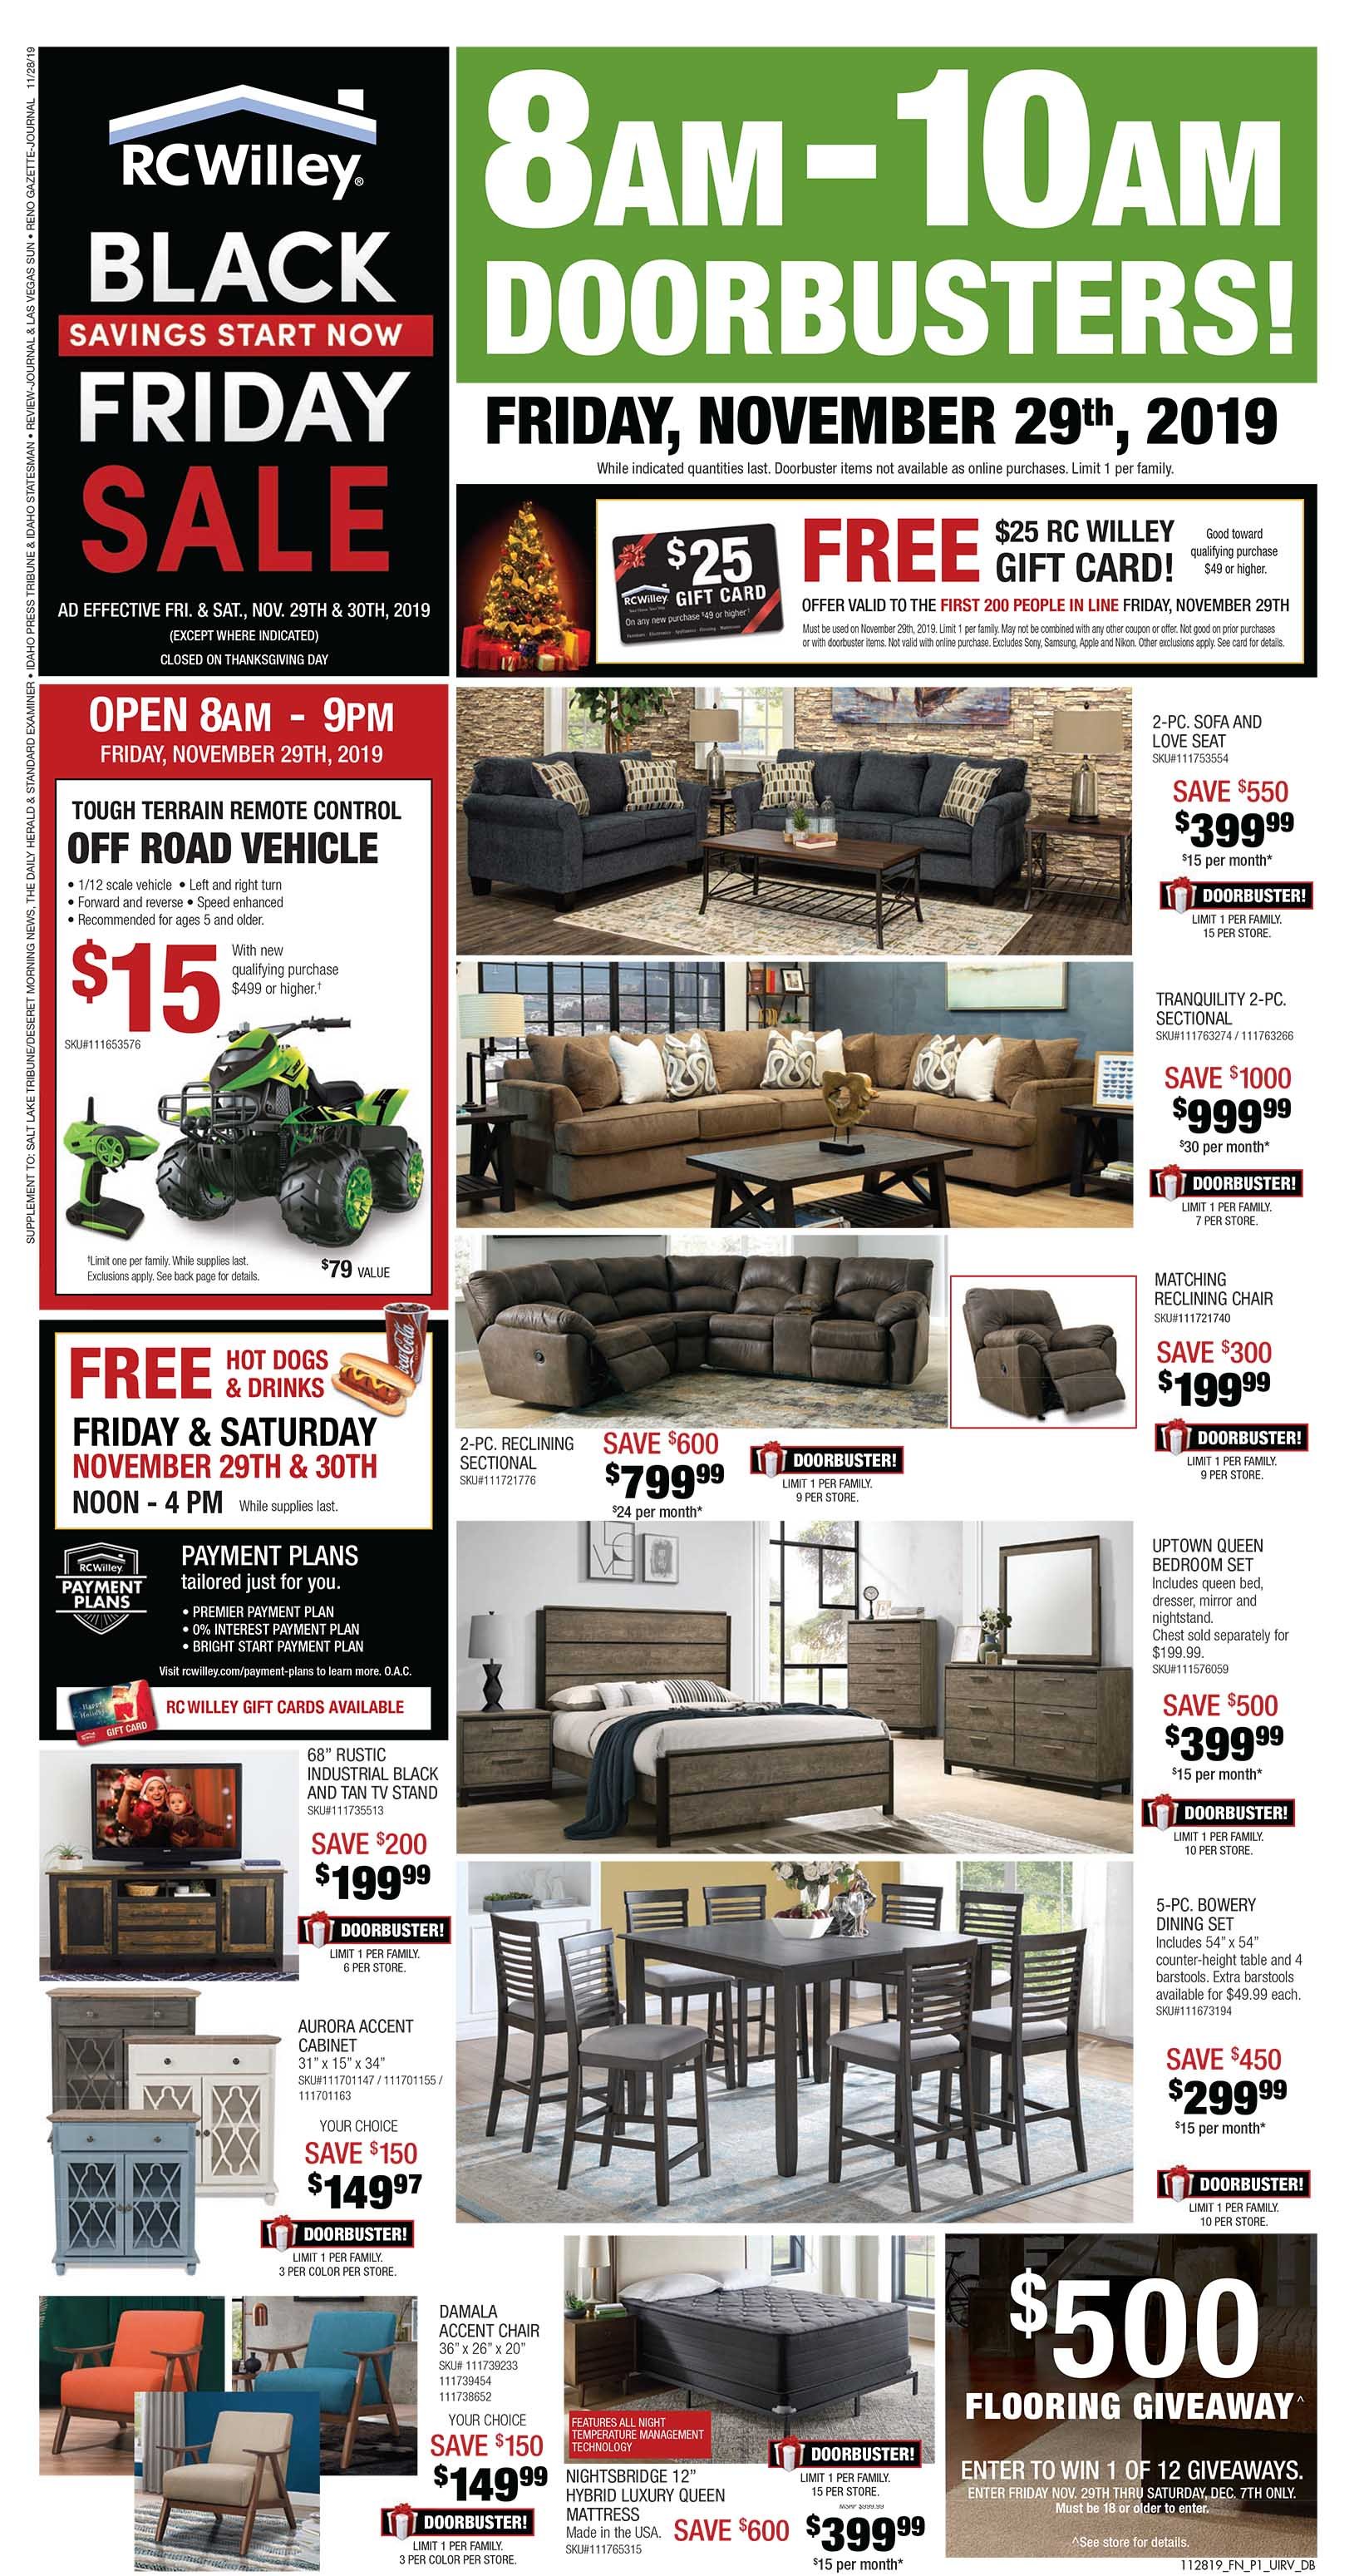 RC Willey's Black Friday Furniture Sale is Finally Here! Plus DOORBUSTERS!!